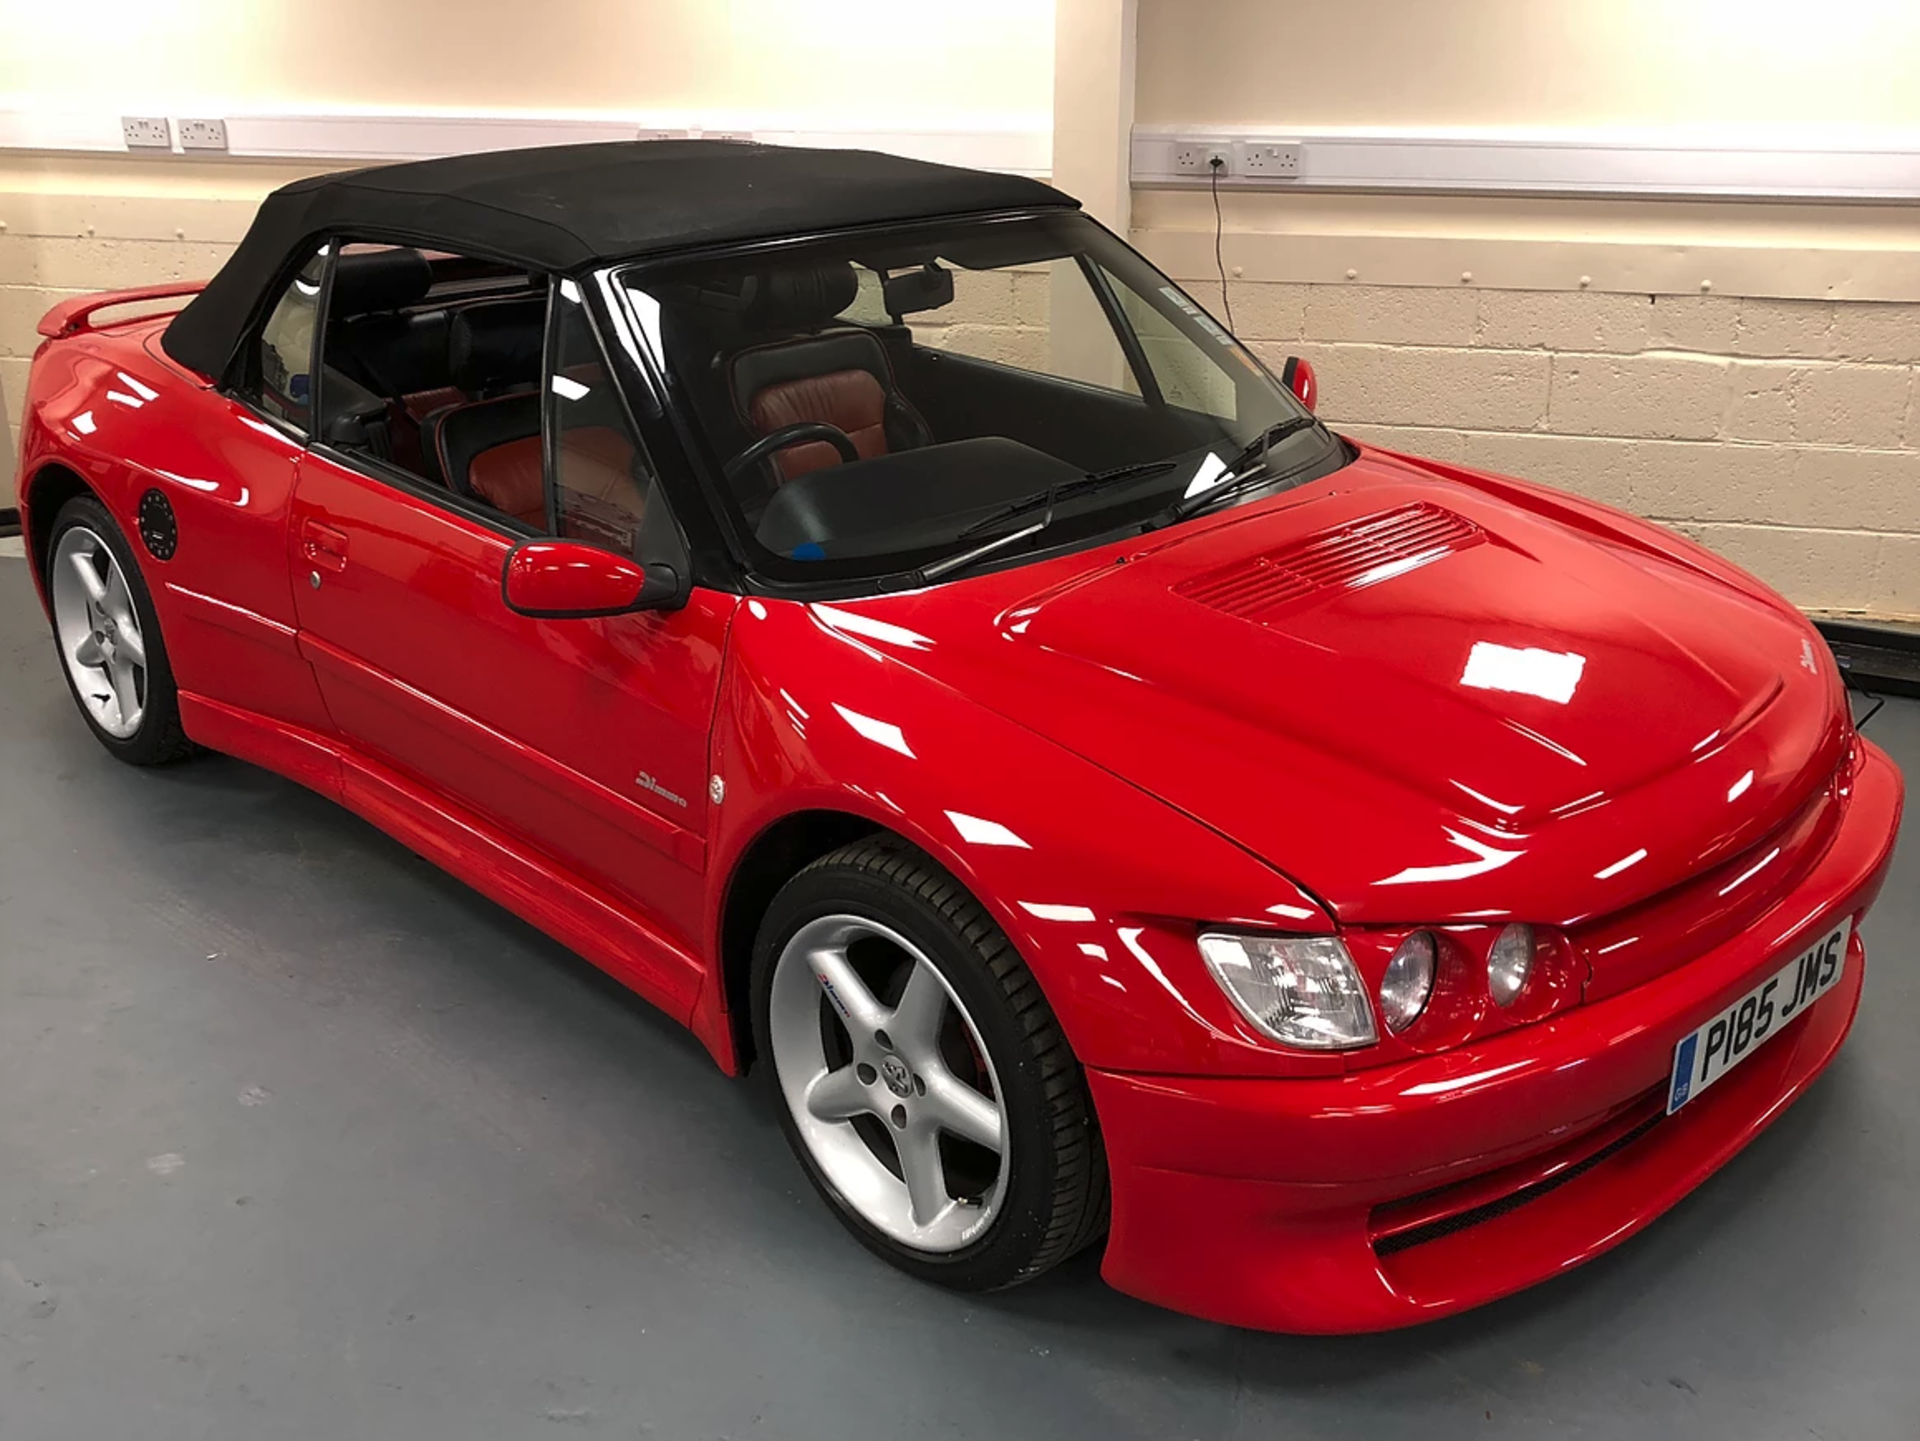 Peugeot 306 2.0i Cabriolet - Dimma prototype. Number 1 of only 2 ever built. - Image 2 of 12